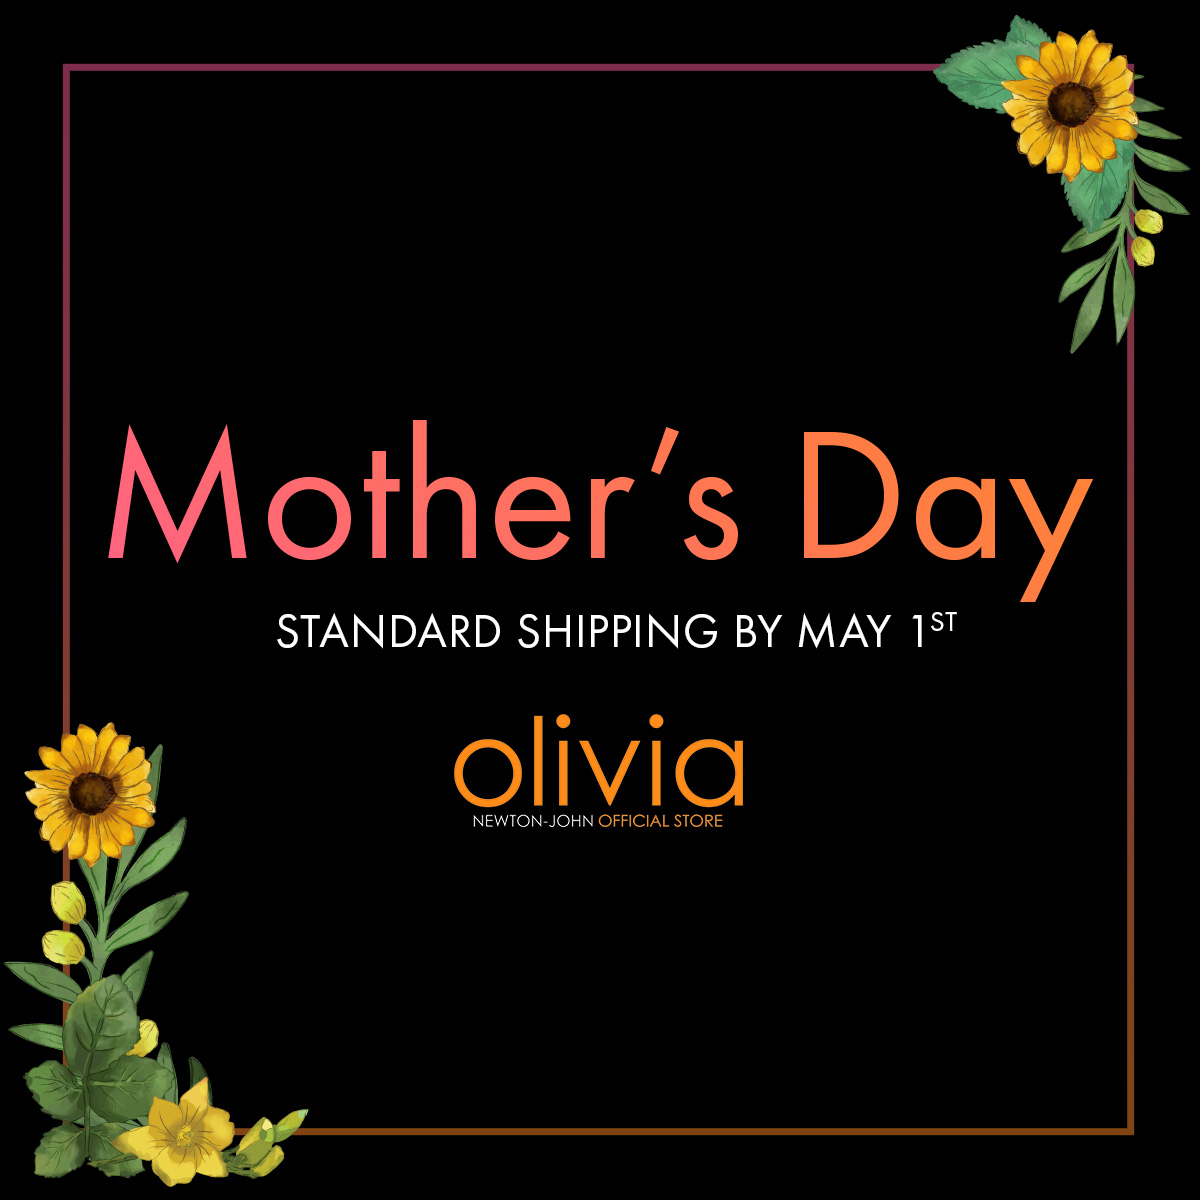 Give the gift of fitness and fashion this Mother's Day with Olivia Newton-John's iconic workout gear! 💪🌻 Shop now at images-staging.musictoday.com/Stores/2024/ol… !! #OliviaNewtonJohn #LetsGetPhysical #MothersDayGift #FitnessFashion